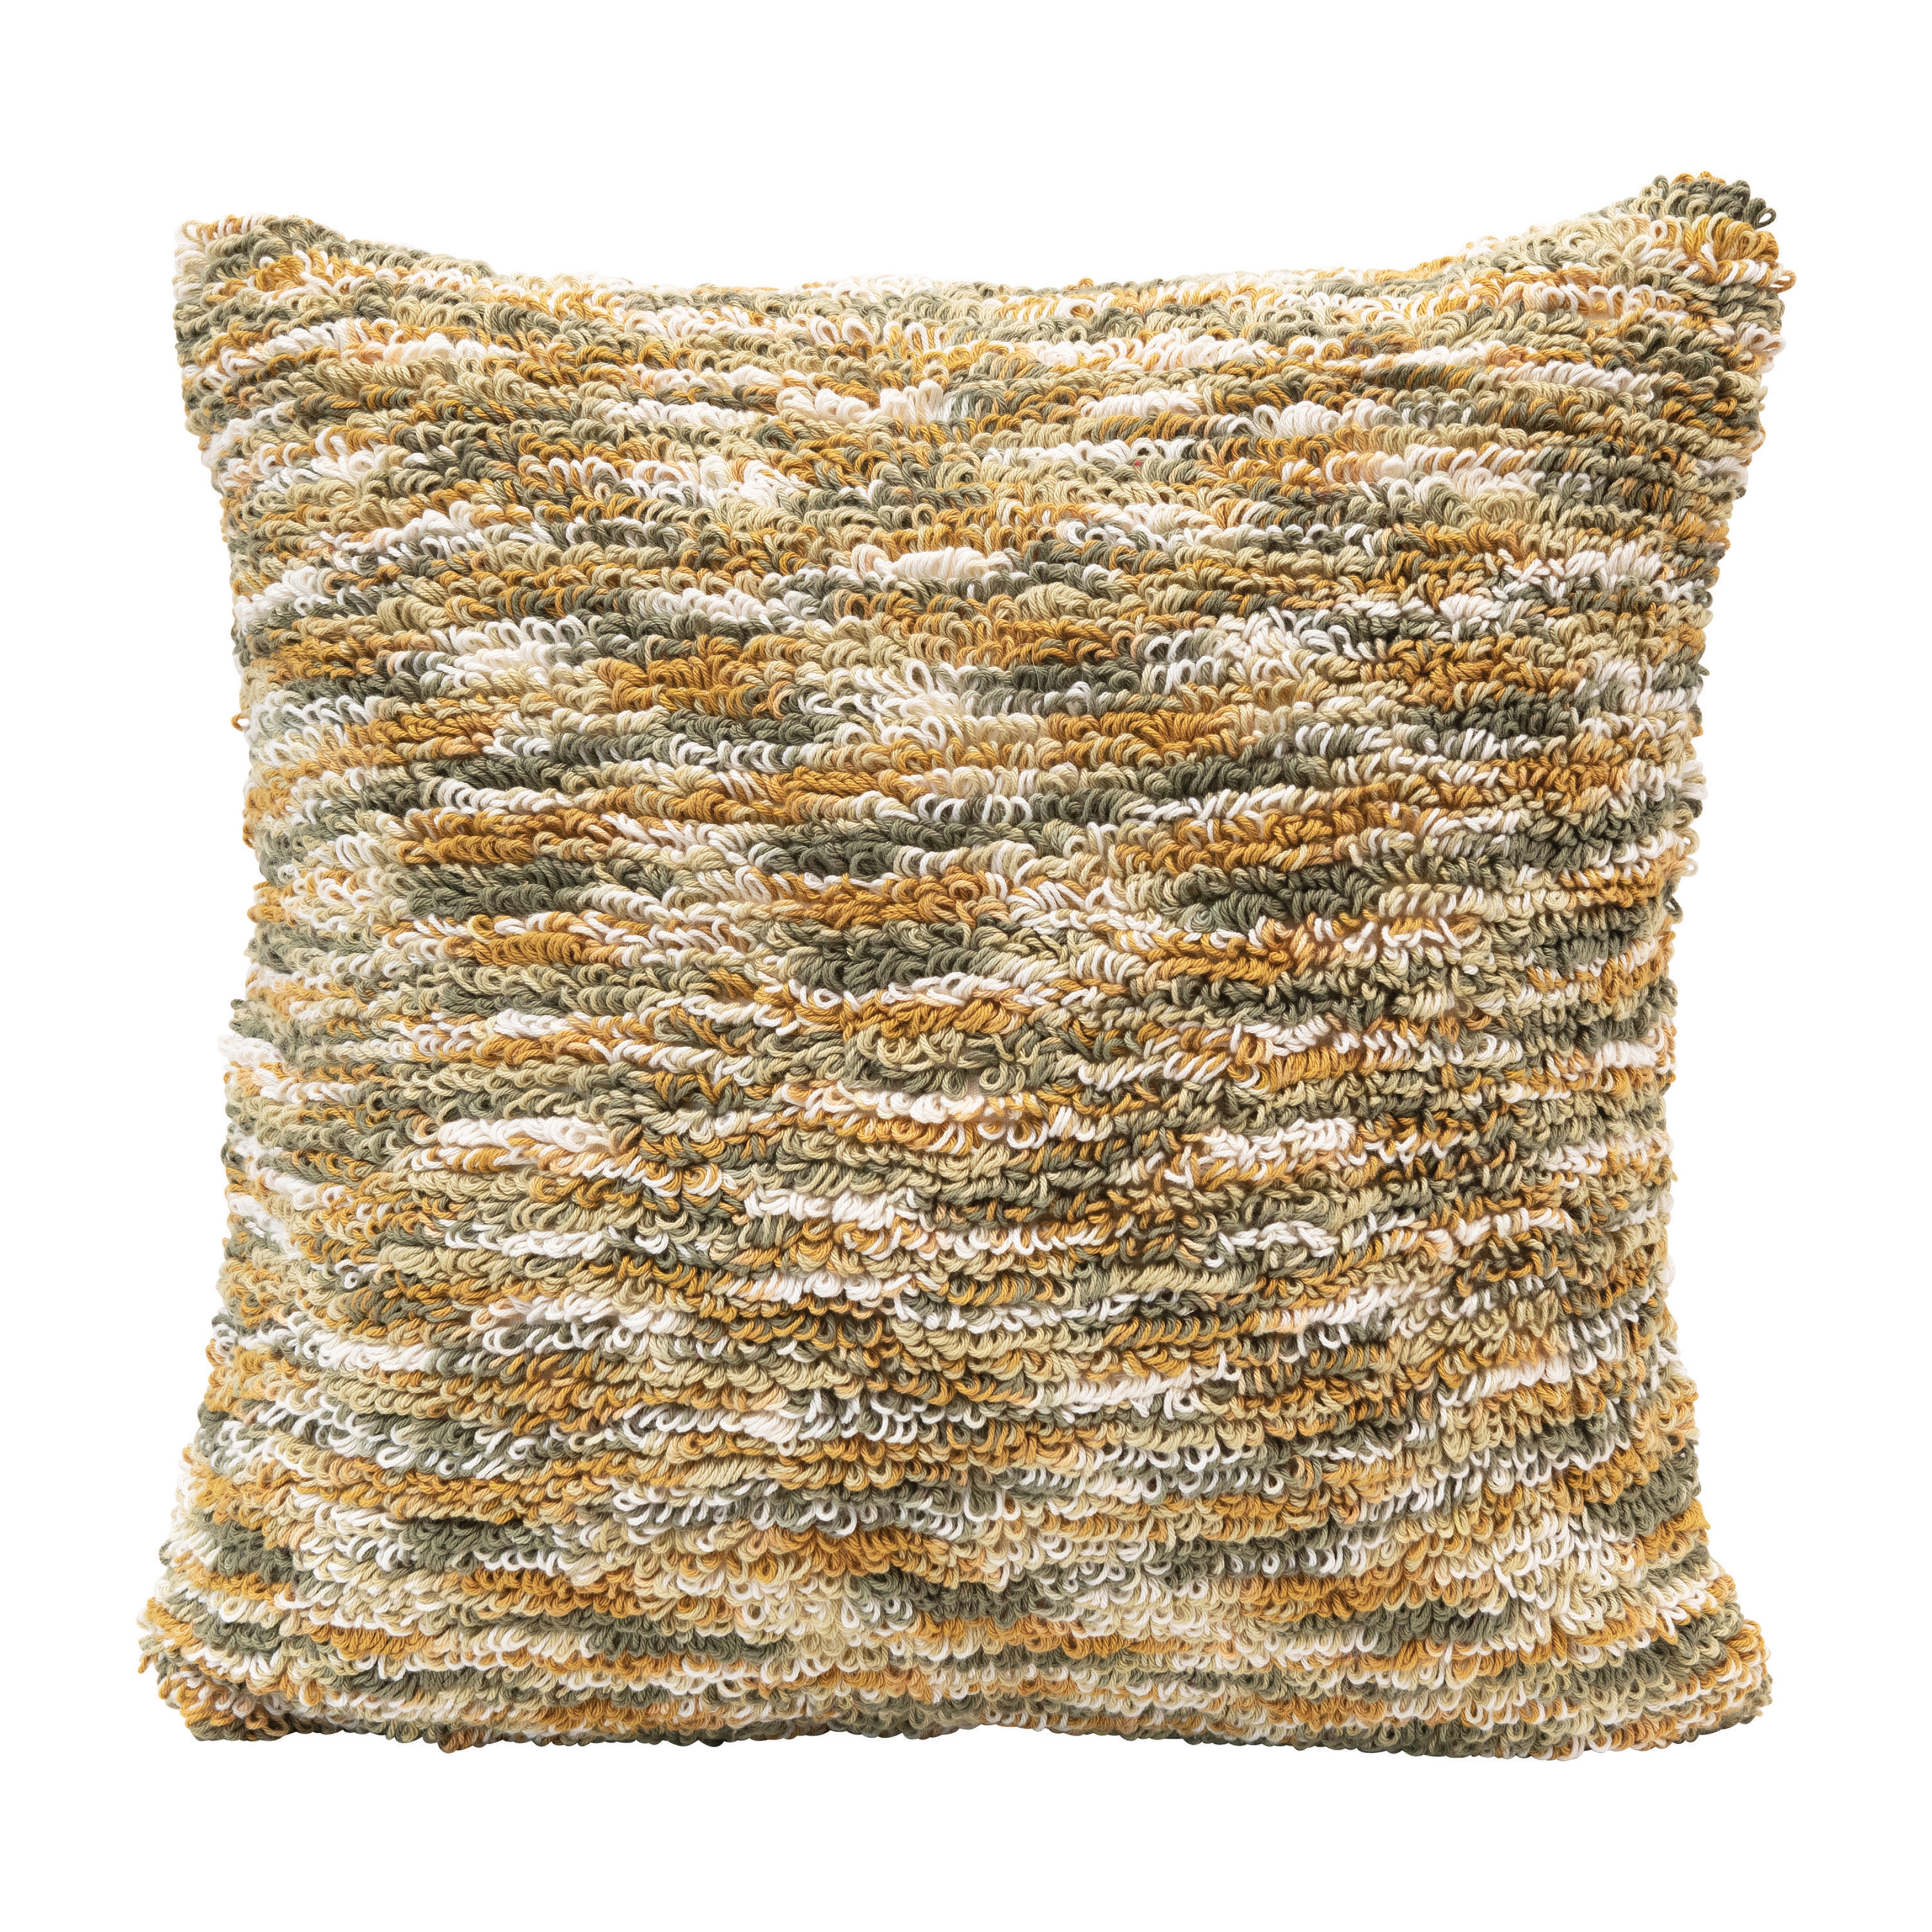 Woven Cotton Space-Dyed Pillow, Multi Color - Image 0